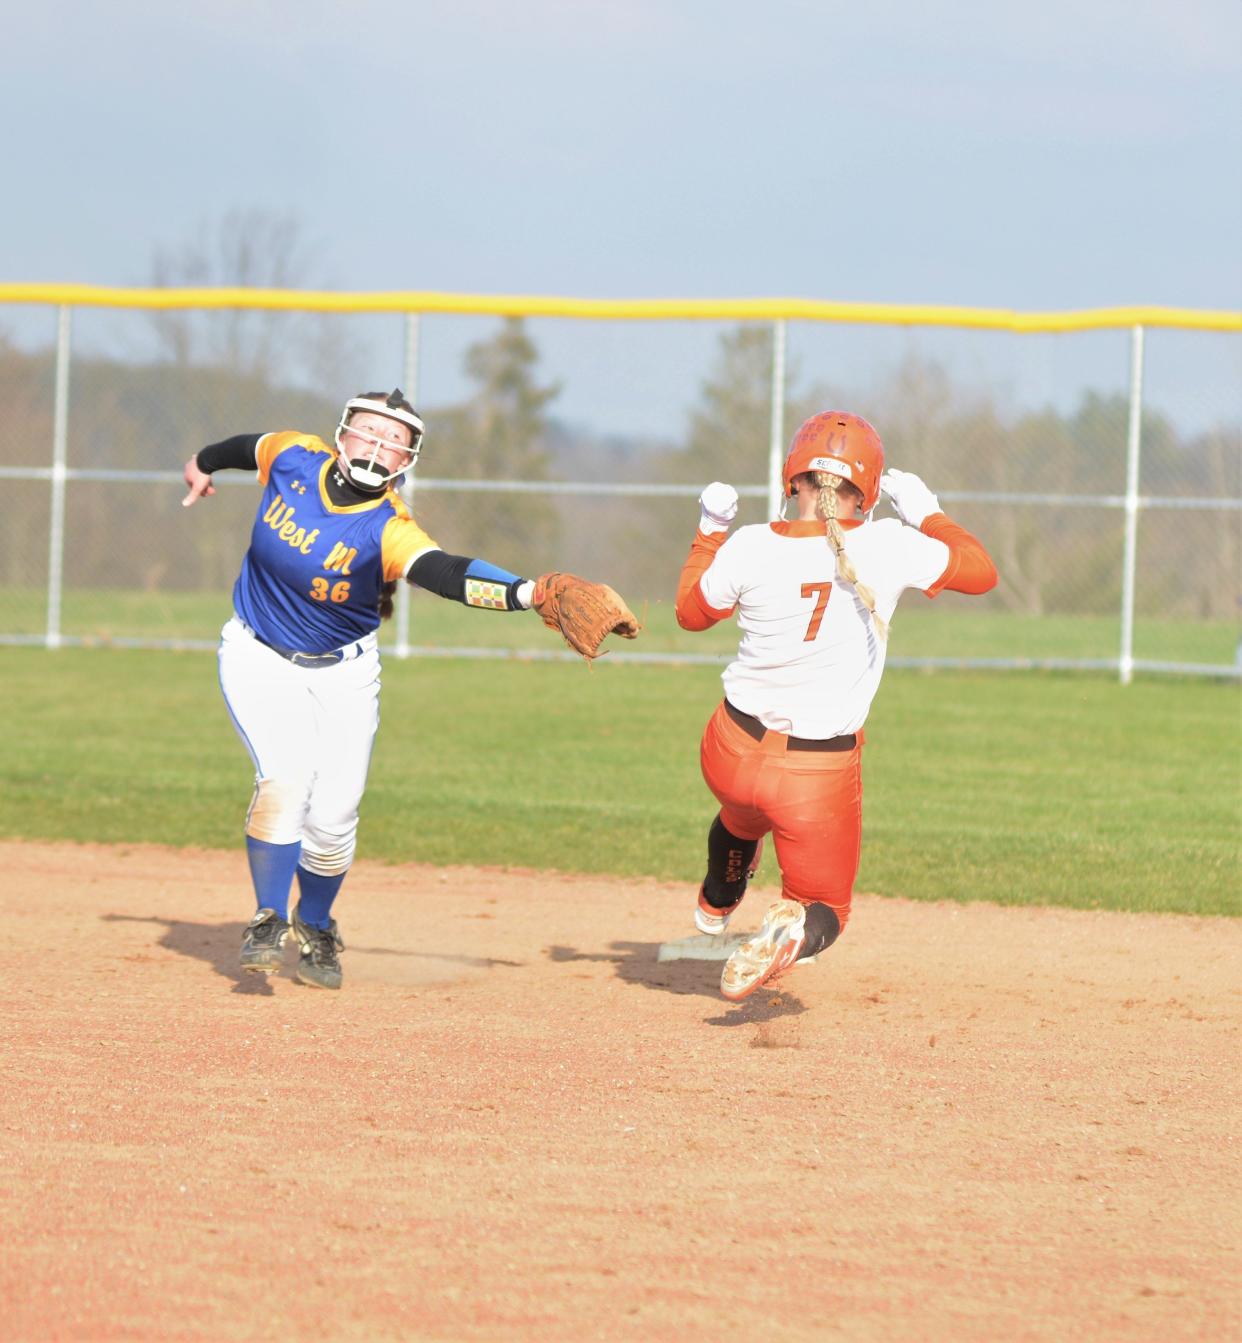 Meadowbrook's Addy Wiggins slides into second base around the tag of West Muskingum's Kadie Bare in Monday's softball game. The Tornadoes won 6-5.